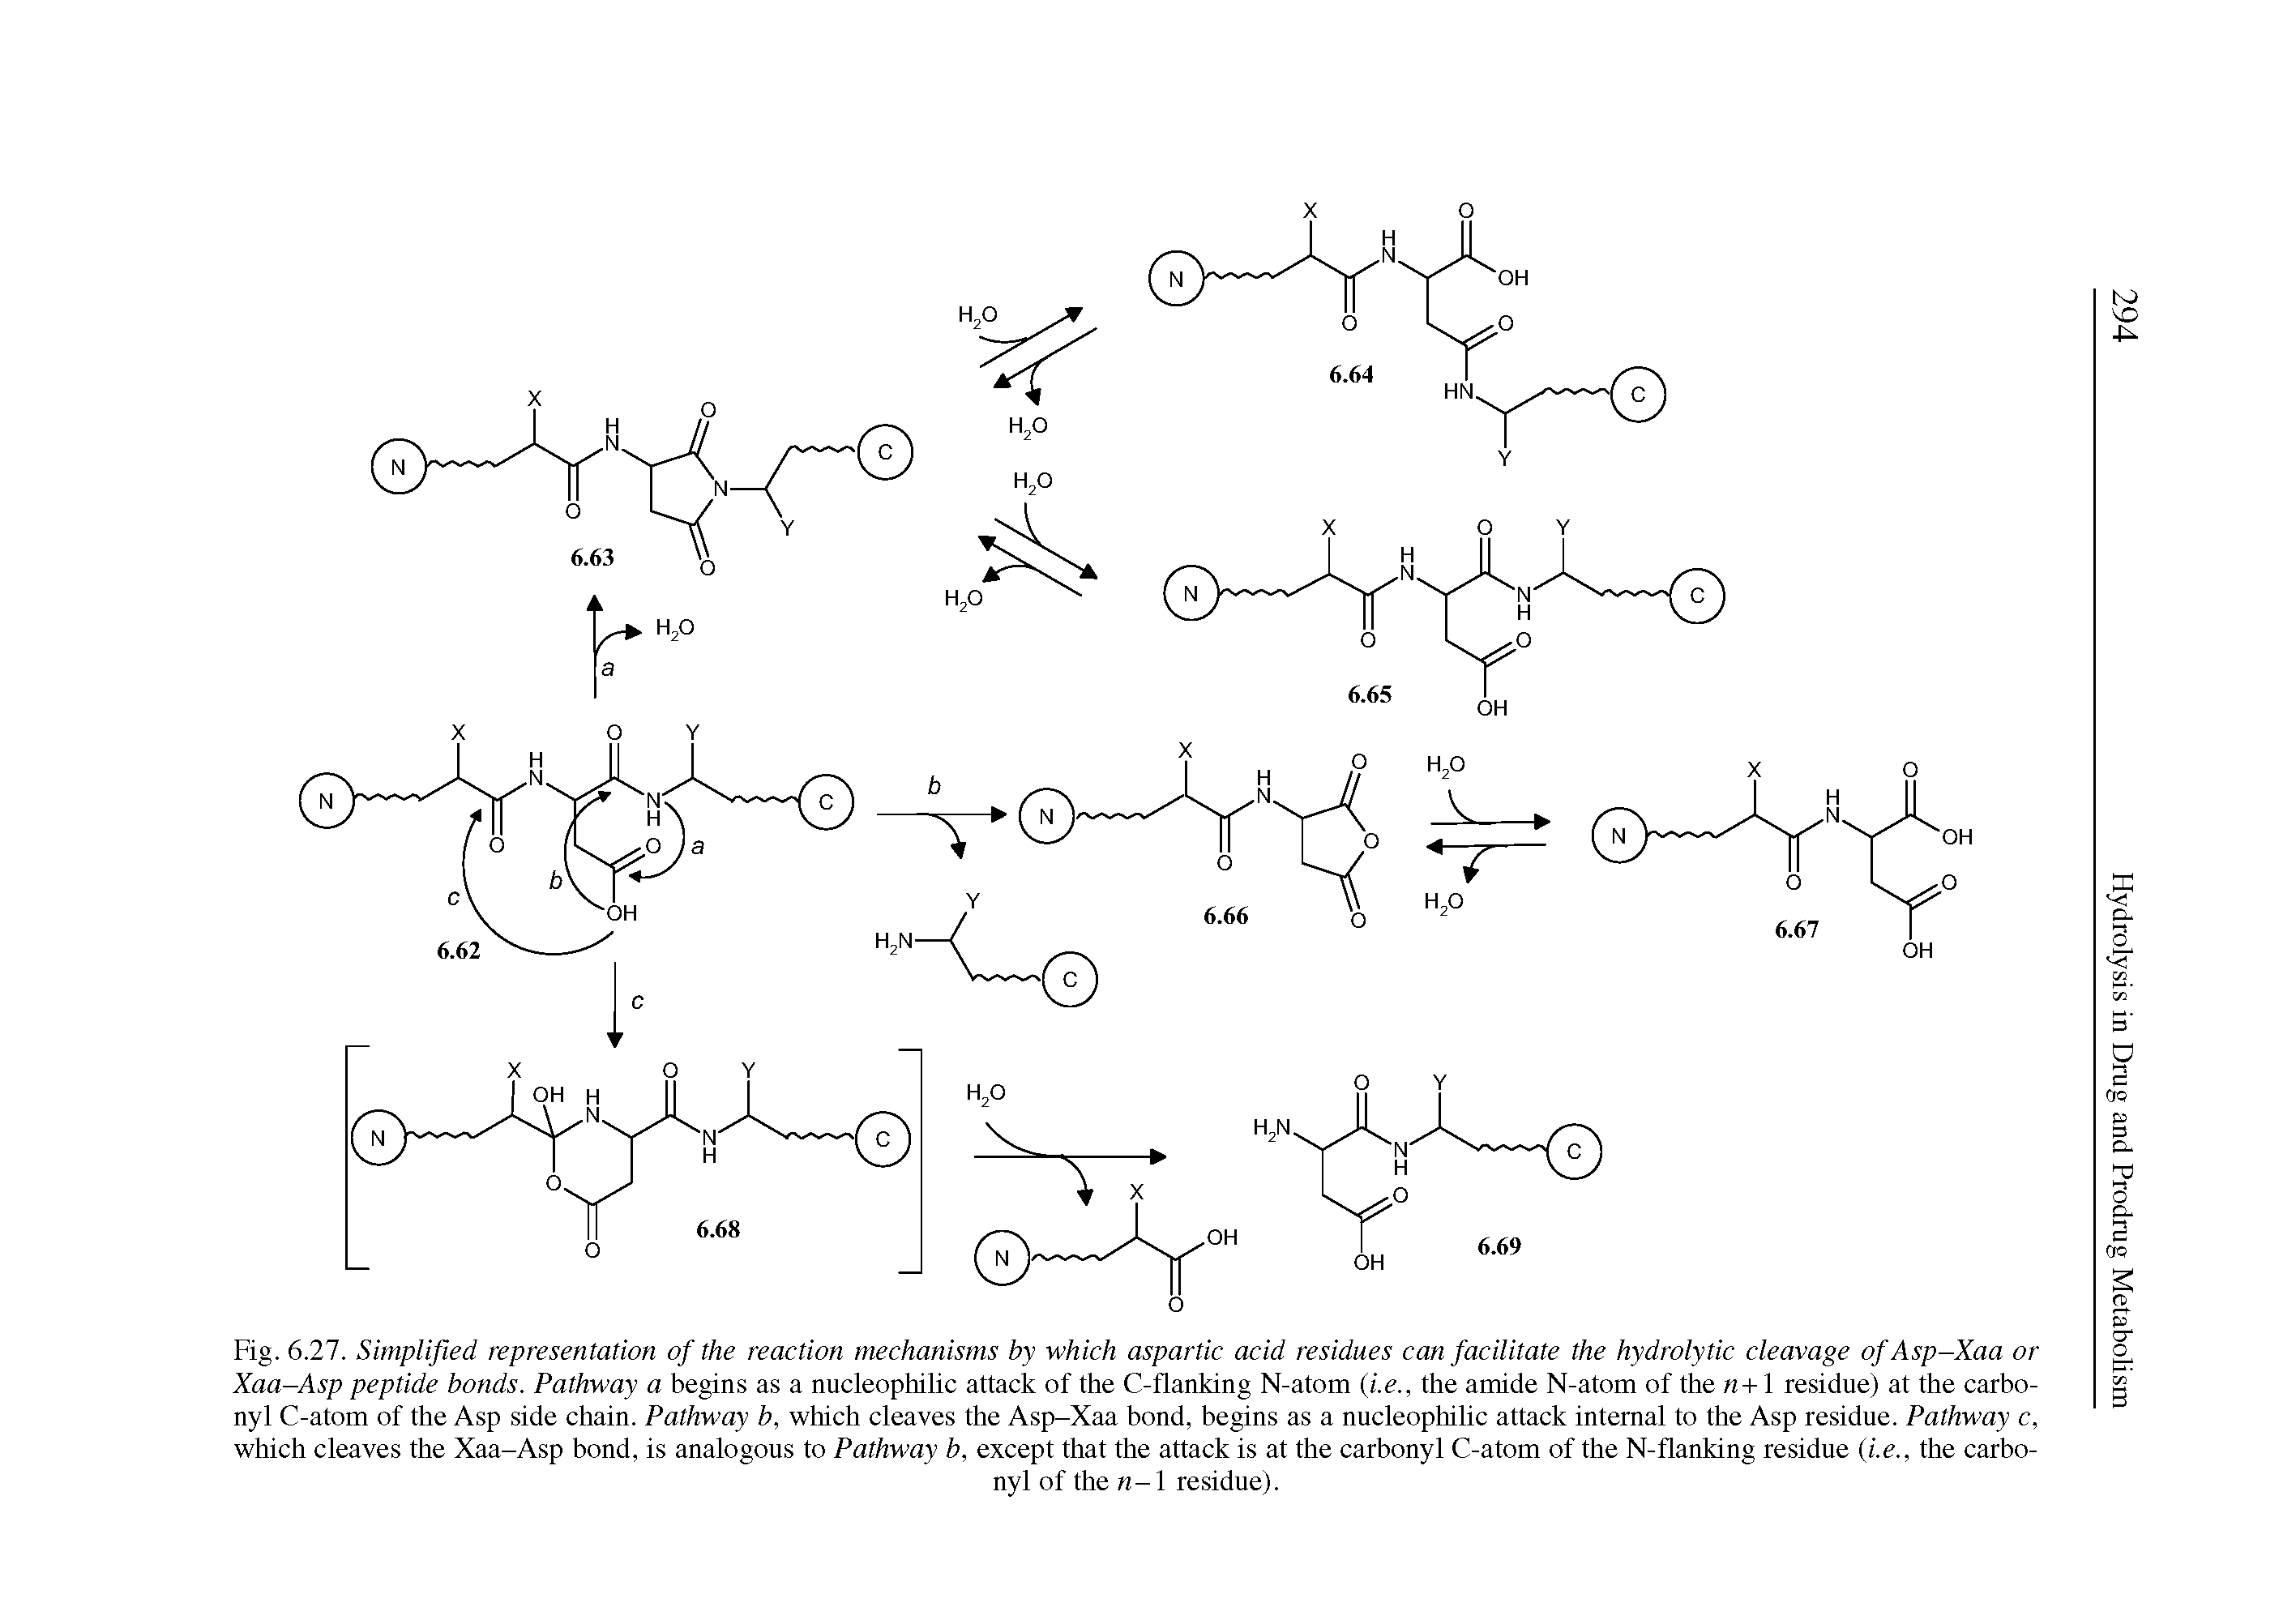 Fig. 6.27. Simplified representation of the reaction mechanisms by which aspartic acid residues can facilitate the hydrolytic cleavage of Asp-Xaa or Xaa-Asp peptide bonds. Pathway a begins as a nucleophilic attack of the C-flanking N-atom (i.e., the amide N-atom of the n+1 residue) at the carbonyl C-atom of the Asp side chain. Pathway b, which cleaves the Asp-Xaa bond, begins as a nucleophilic attack internal to the Asp residue. Pathway c, which cleaves the Xaa-Asp bond, is analogous to Pathway b, except that the attack is at the carbonyl C-atom of the N-flanking residue (i.e., the carbonyl of the n-1 residue).